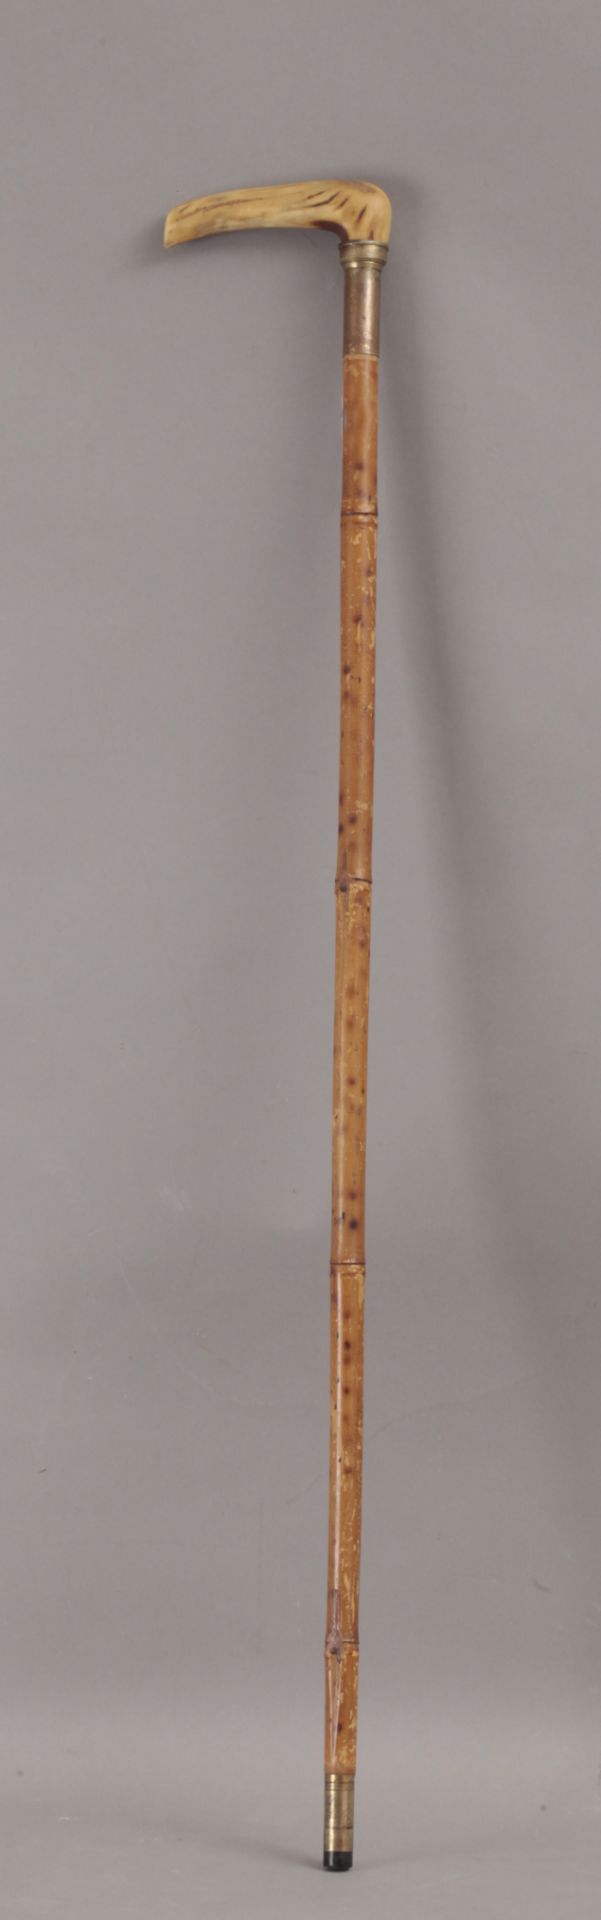 A 19th century walking stick - Image 4 of 8